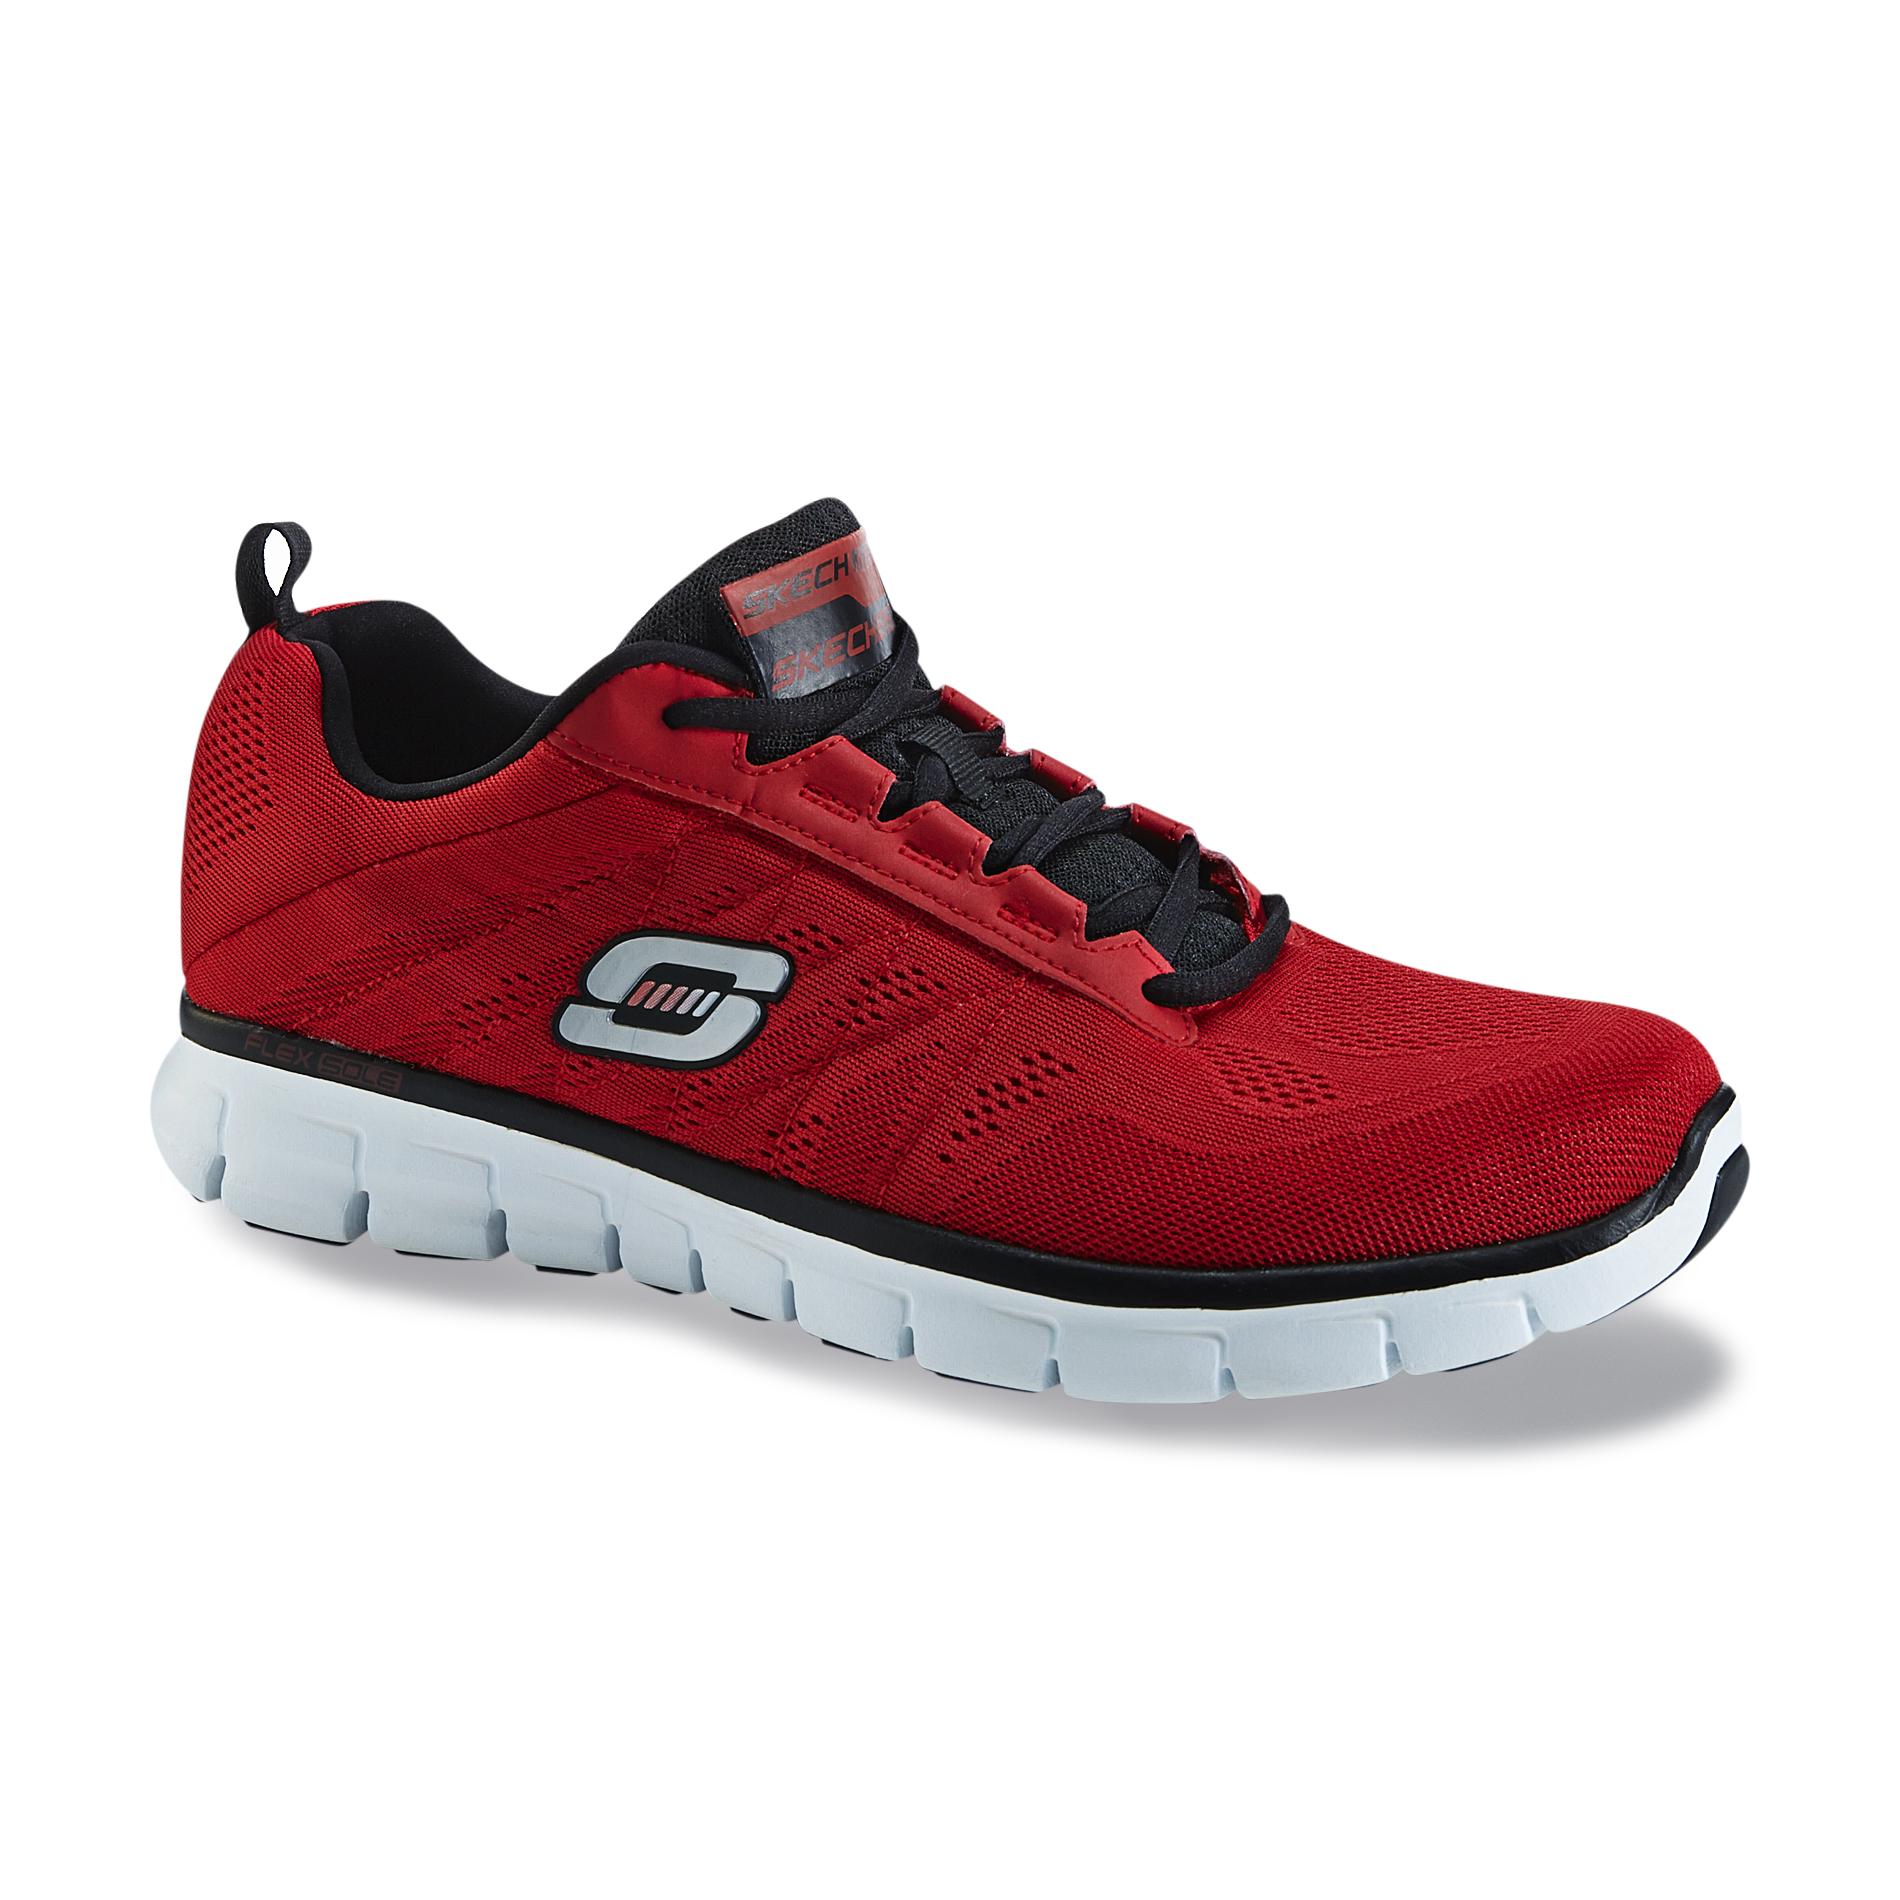 Skechers Men's Power Switch Red/Black Athletic Shoes